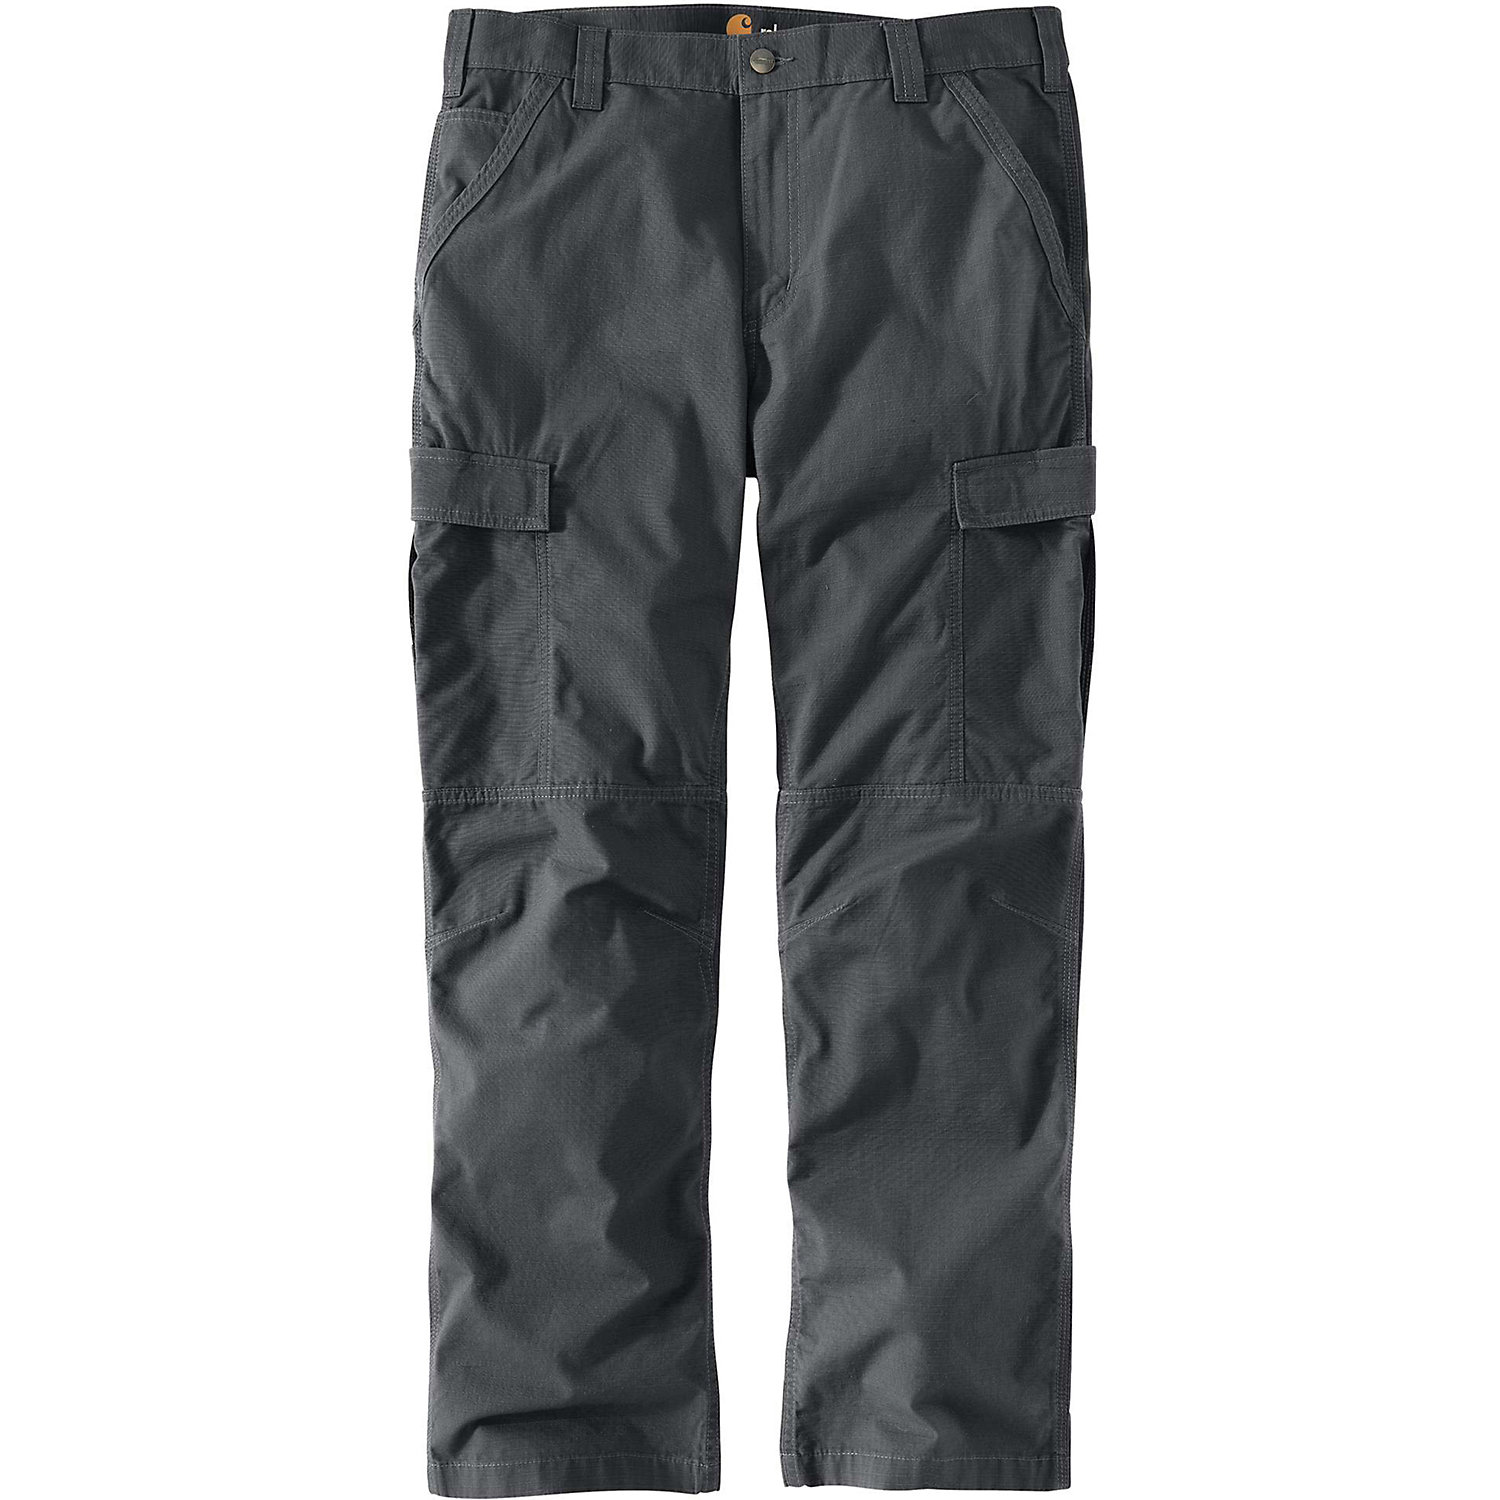 Carhartt Men's Force Relaxed Fit Ripstop Cargo Work Pant - Moosejaw